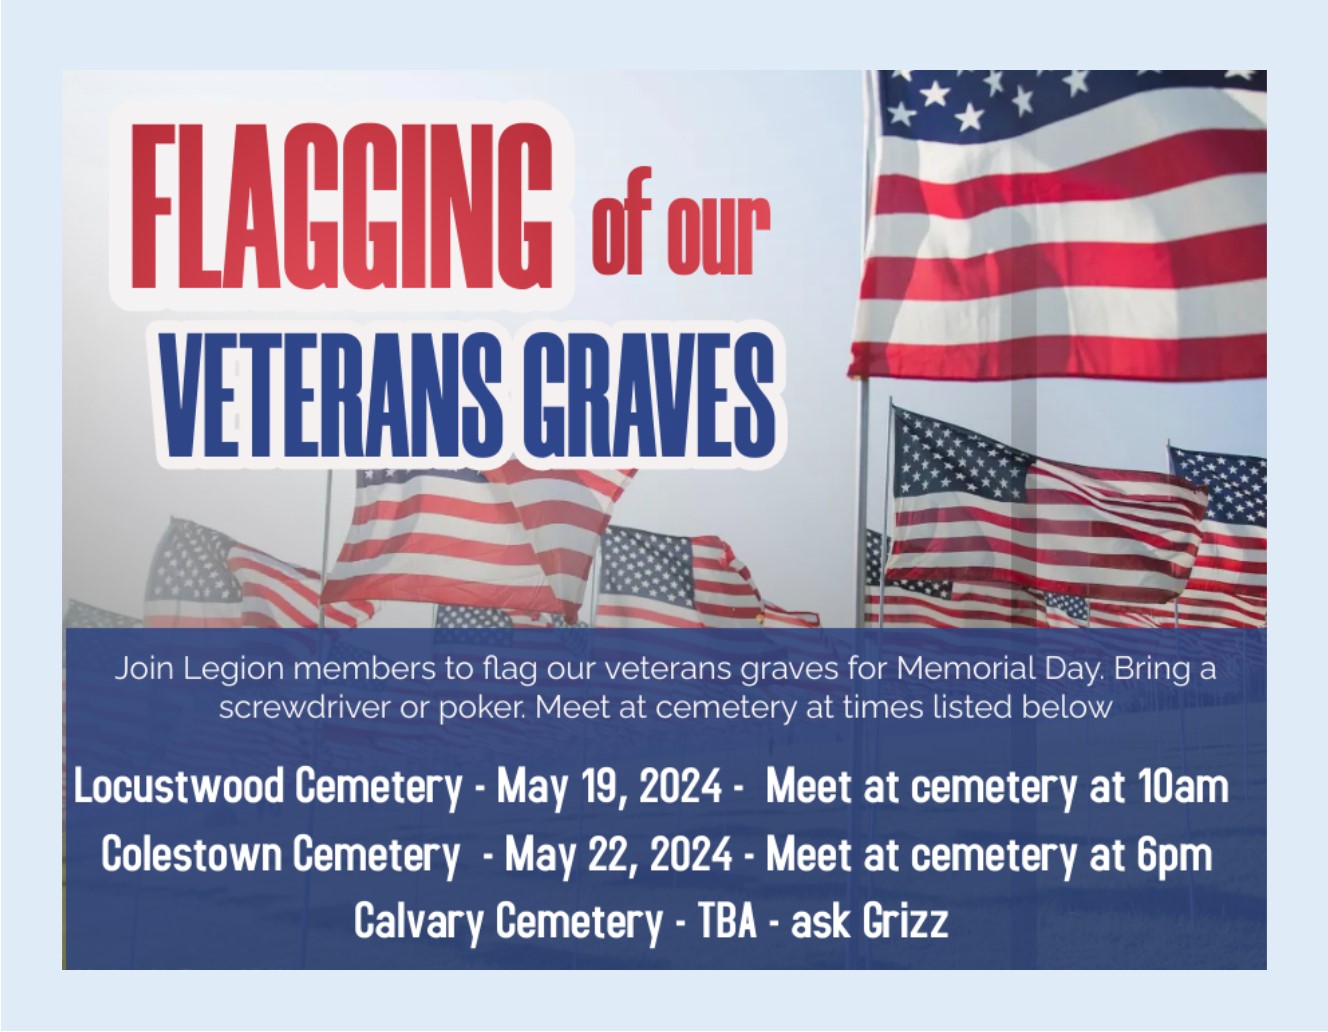 Flagging of graves at Calvary Cemetery